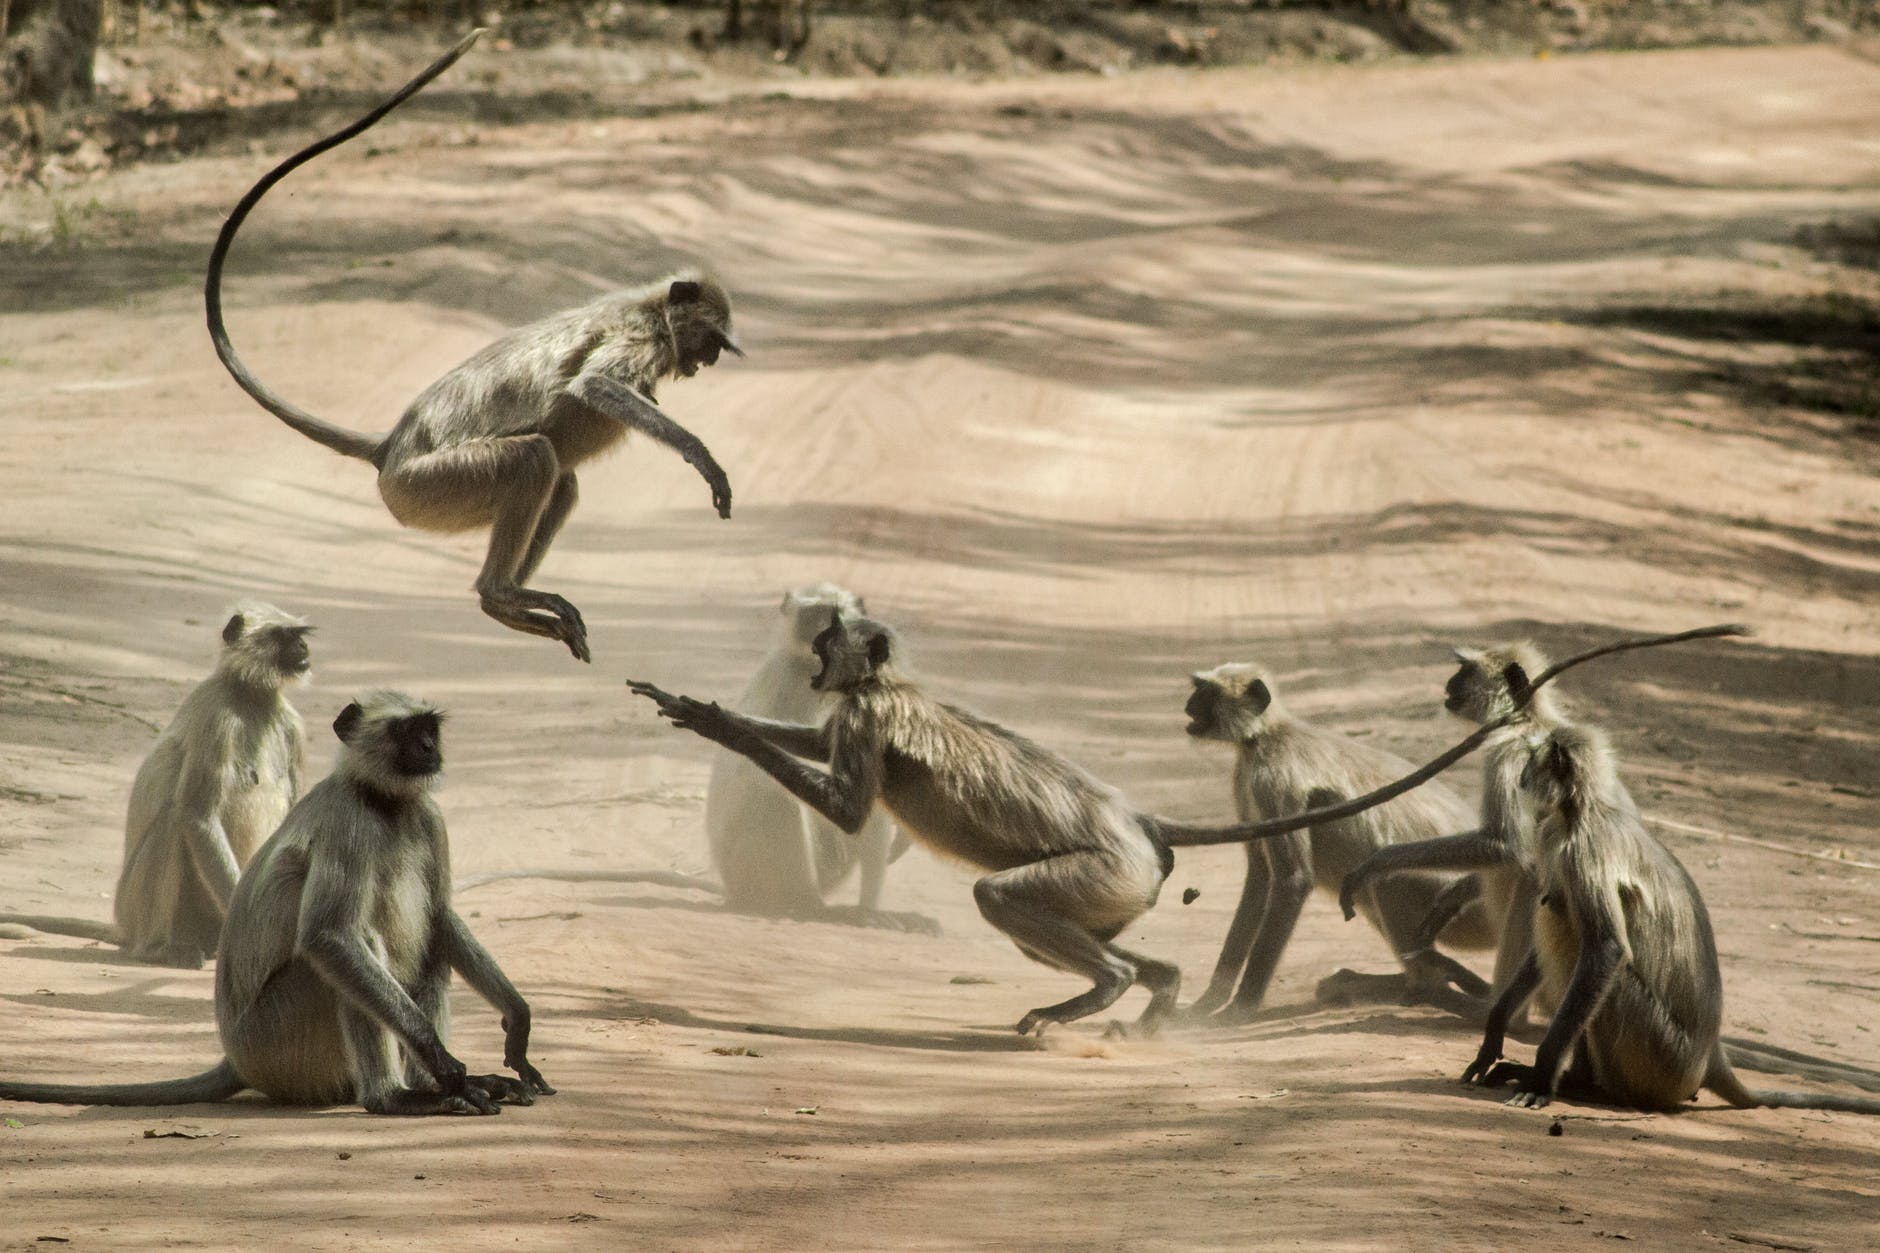 group of monkey on dirt road